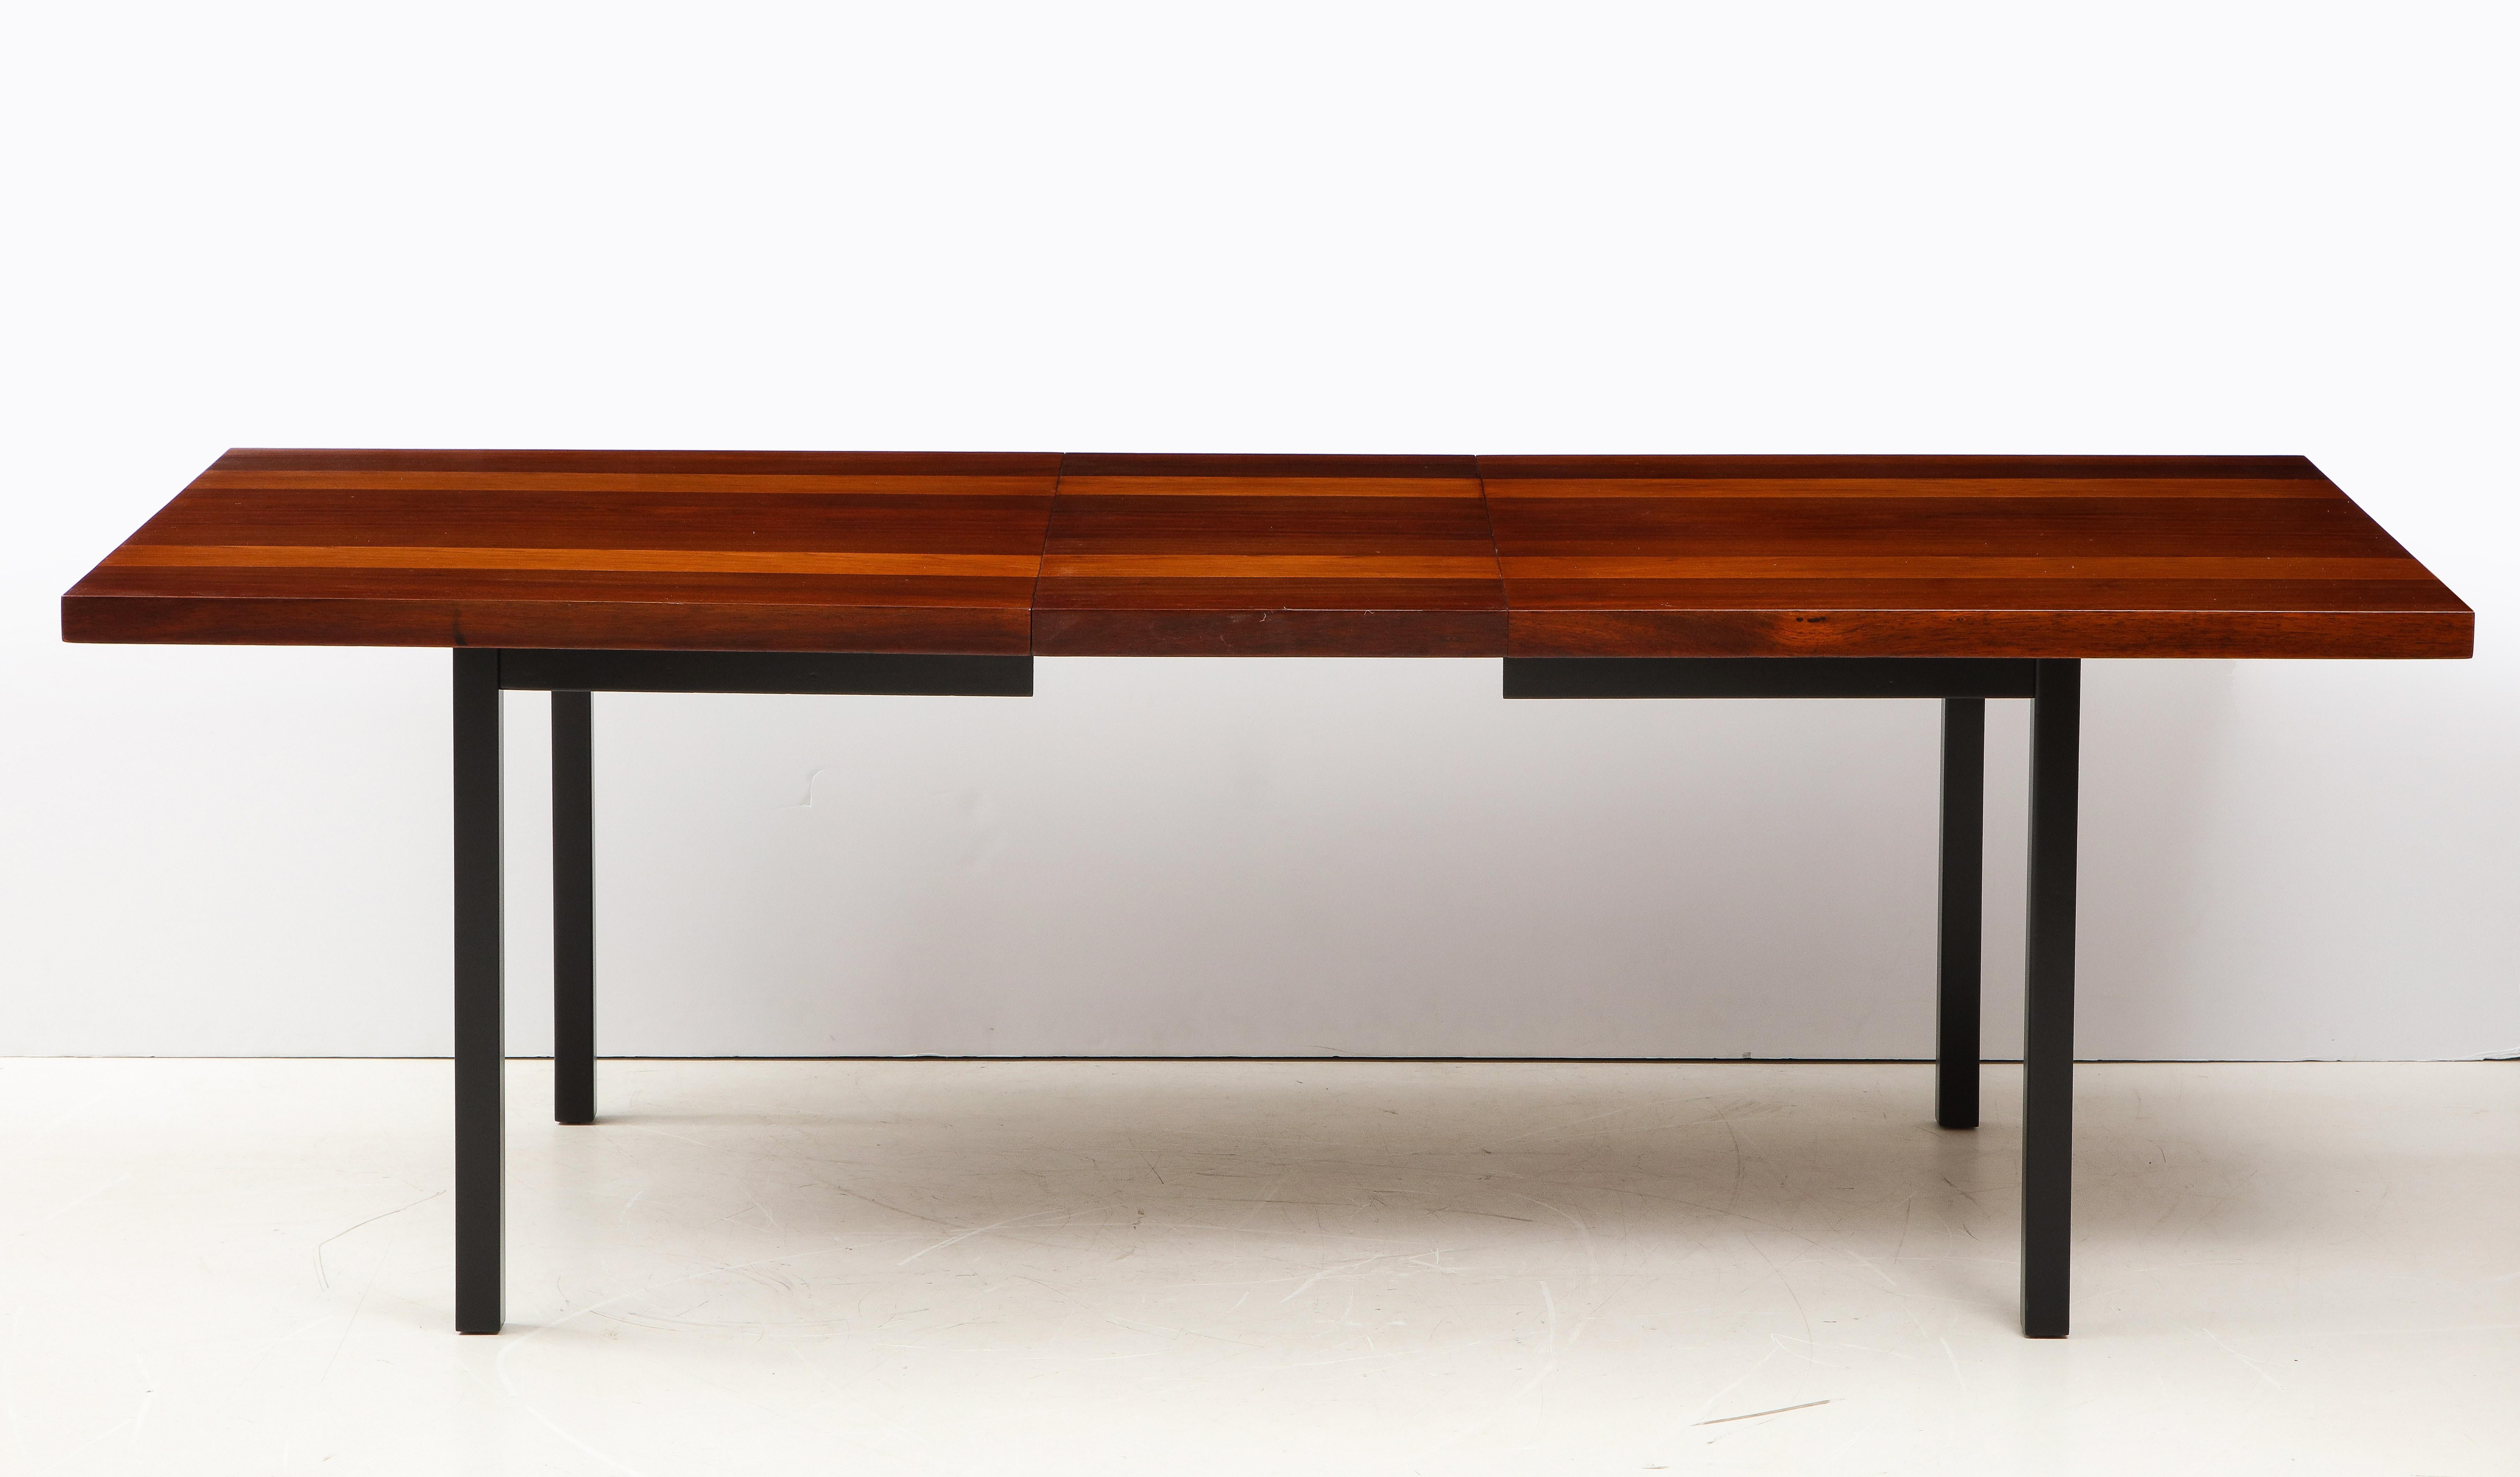 Stunning 1960's Mid-Century Modern Milo Baughman designed for Directional dining table with two leaves, fully restored with minor wear and patina due to age and use.

Length without the leaves is 72'' each leave is 20'' wide.